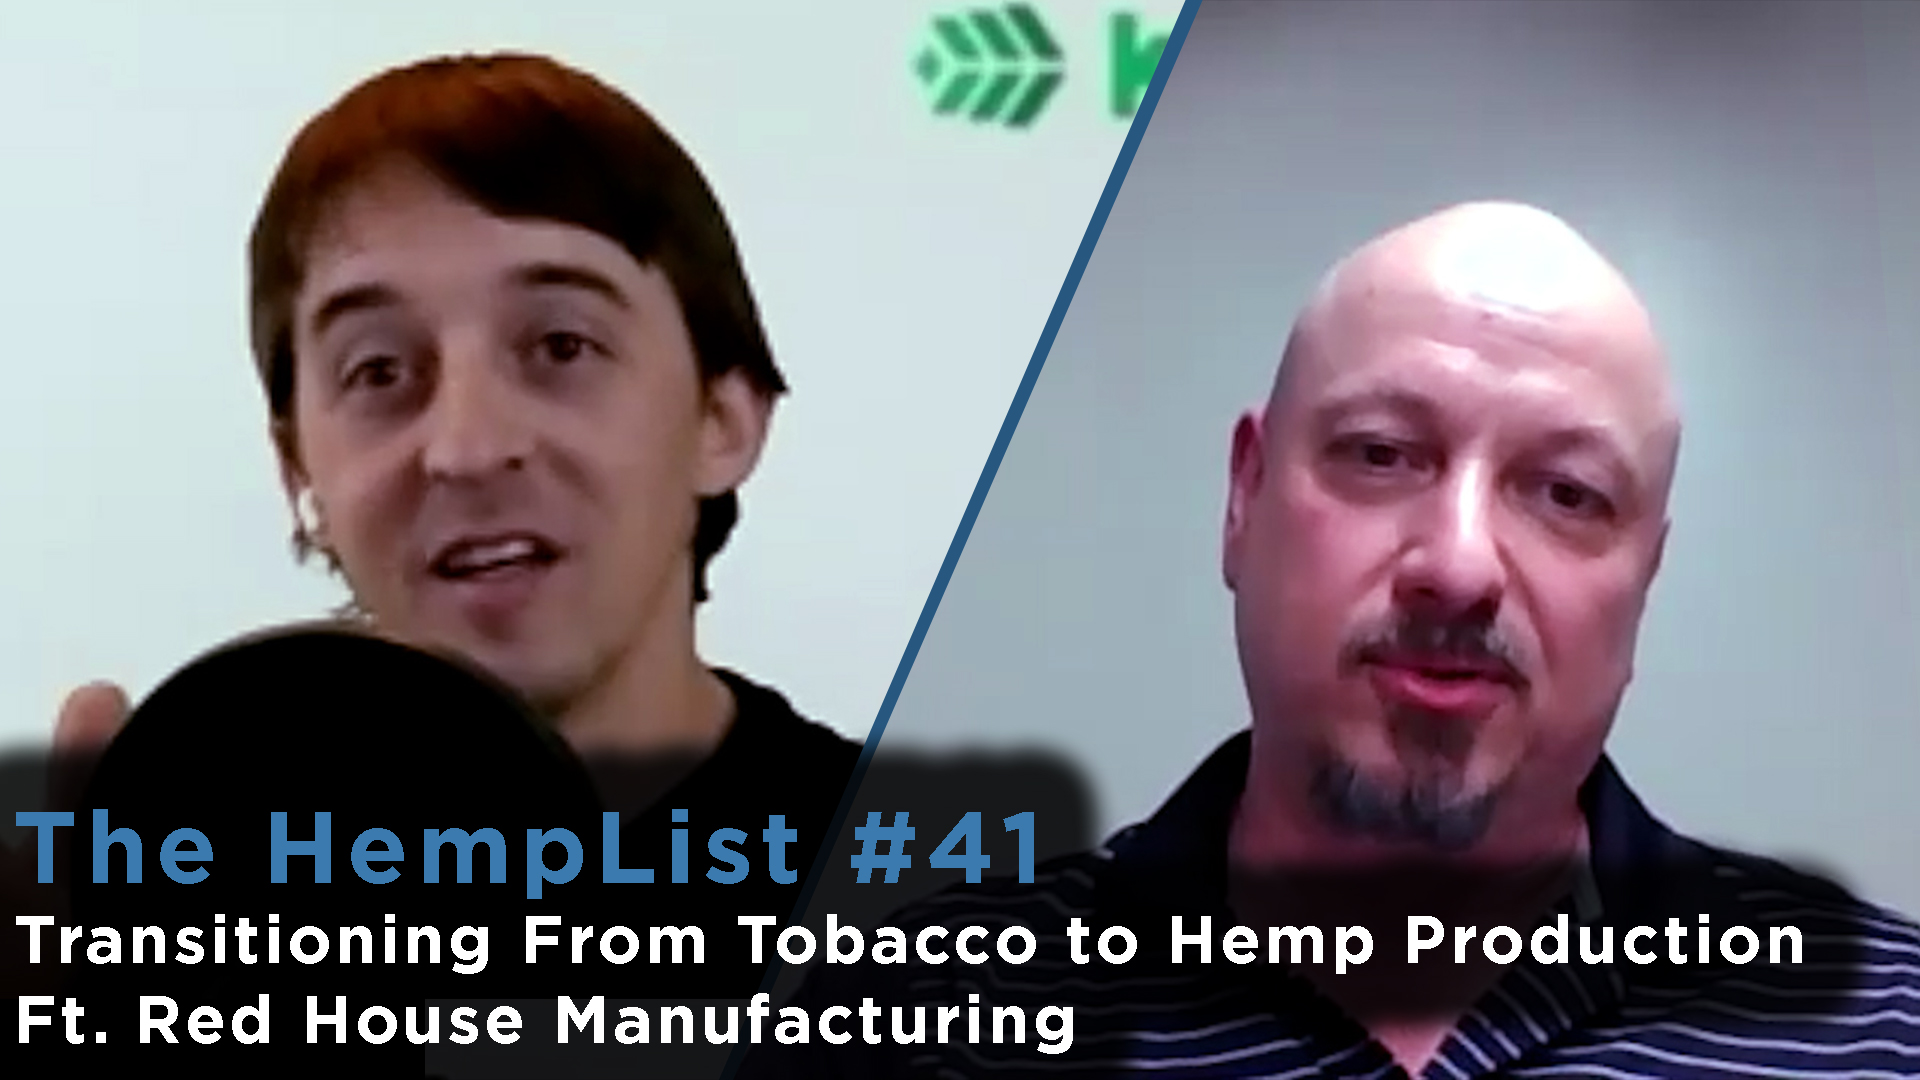 The HempList #41: Transitioning From Tobacco to Hemp Production Ft. Red House Manufacturing